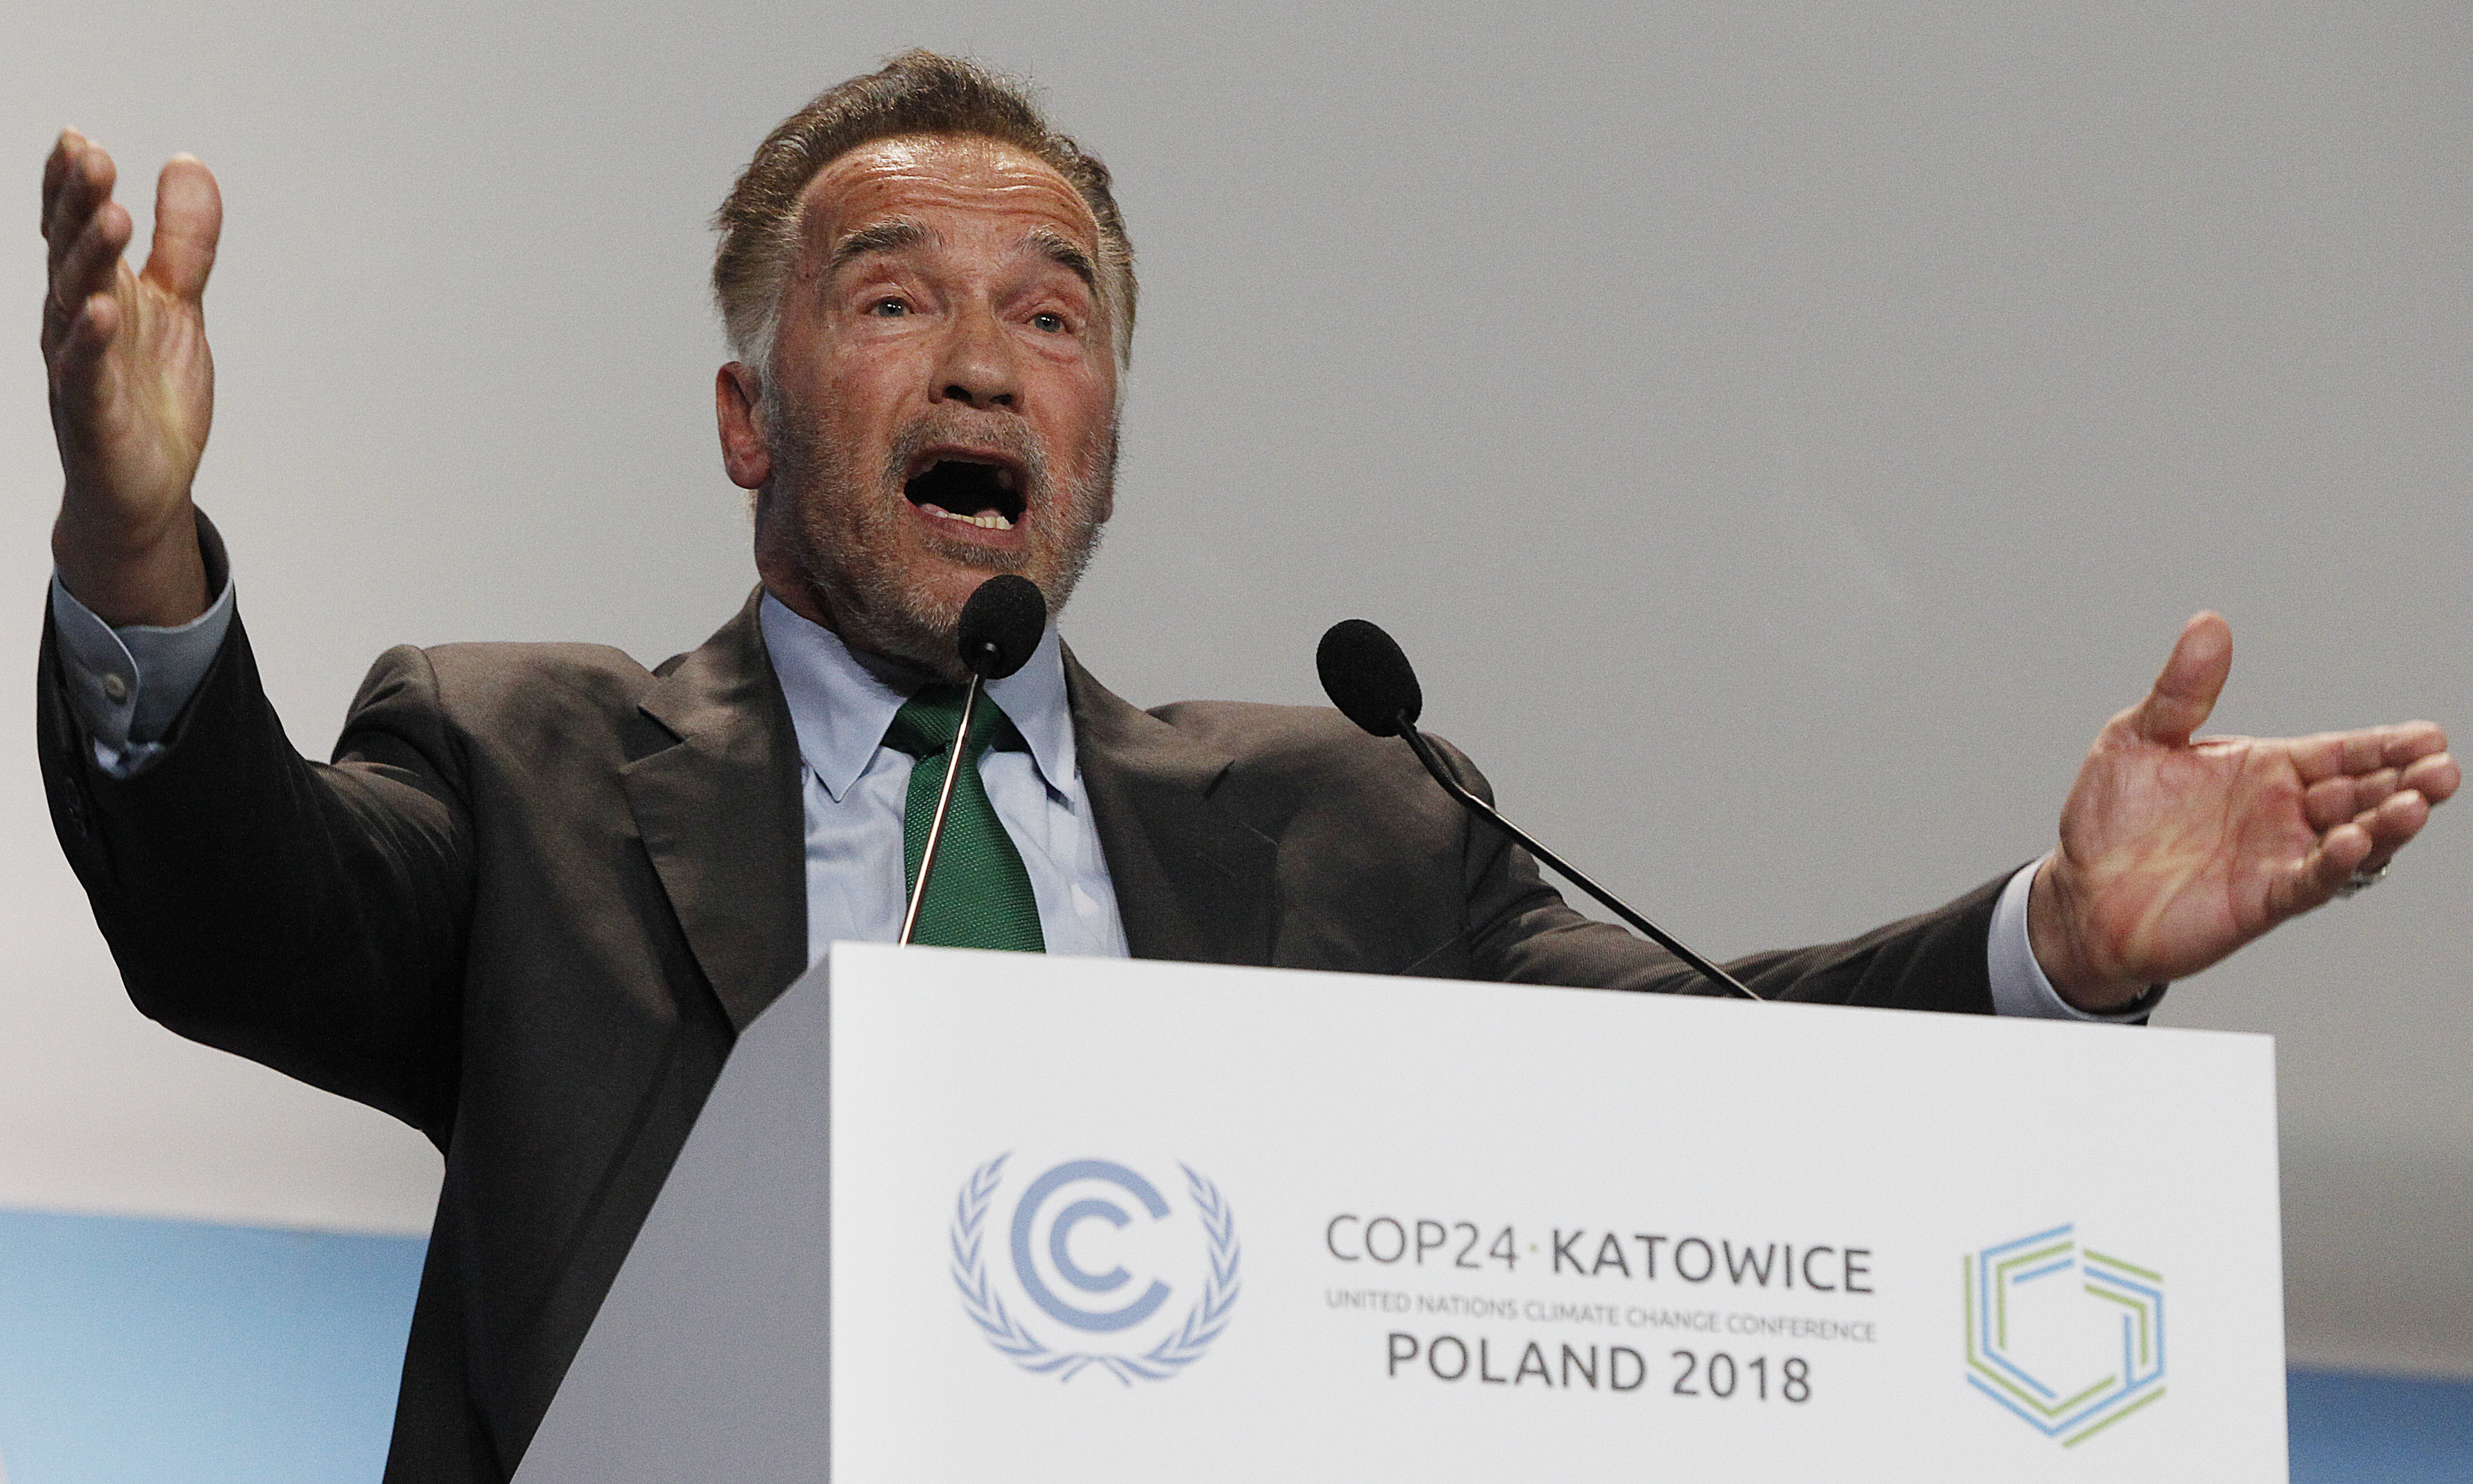 Actor Arnold Schwarzenegger delivers a speech during the opening of COP24 UN Climate Change Conference 2018 in Katowice, Poland, Monday, Dec. 3, 2018. (AP Photo/Czarek Sokolowski)